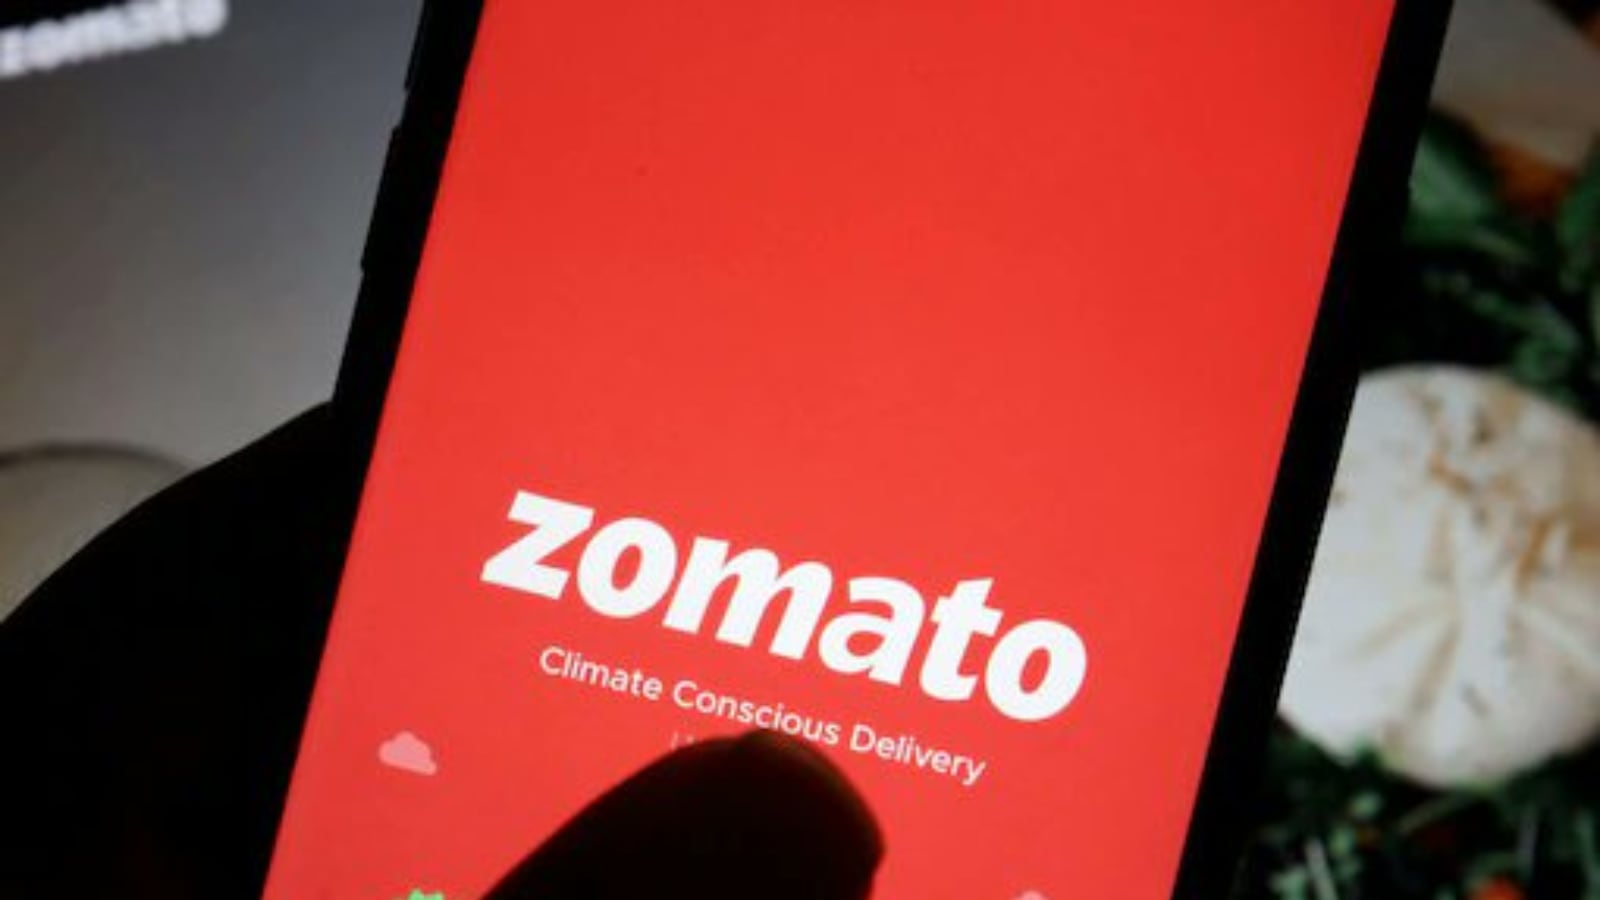 Zomato Jokes About Chatgpt Stockgro And Other Brands Join Meme Fest